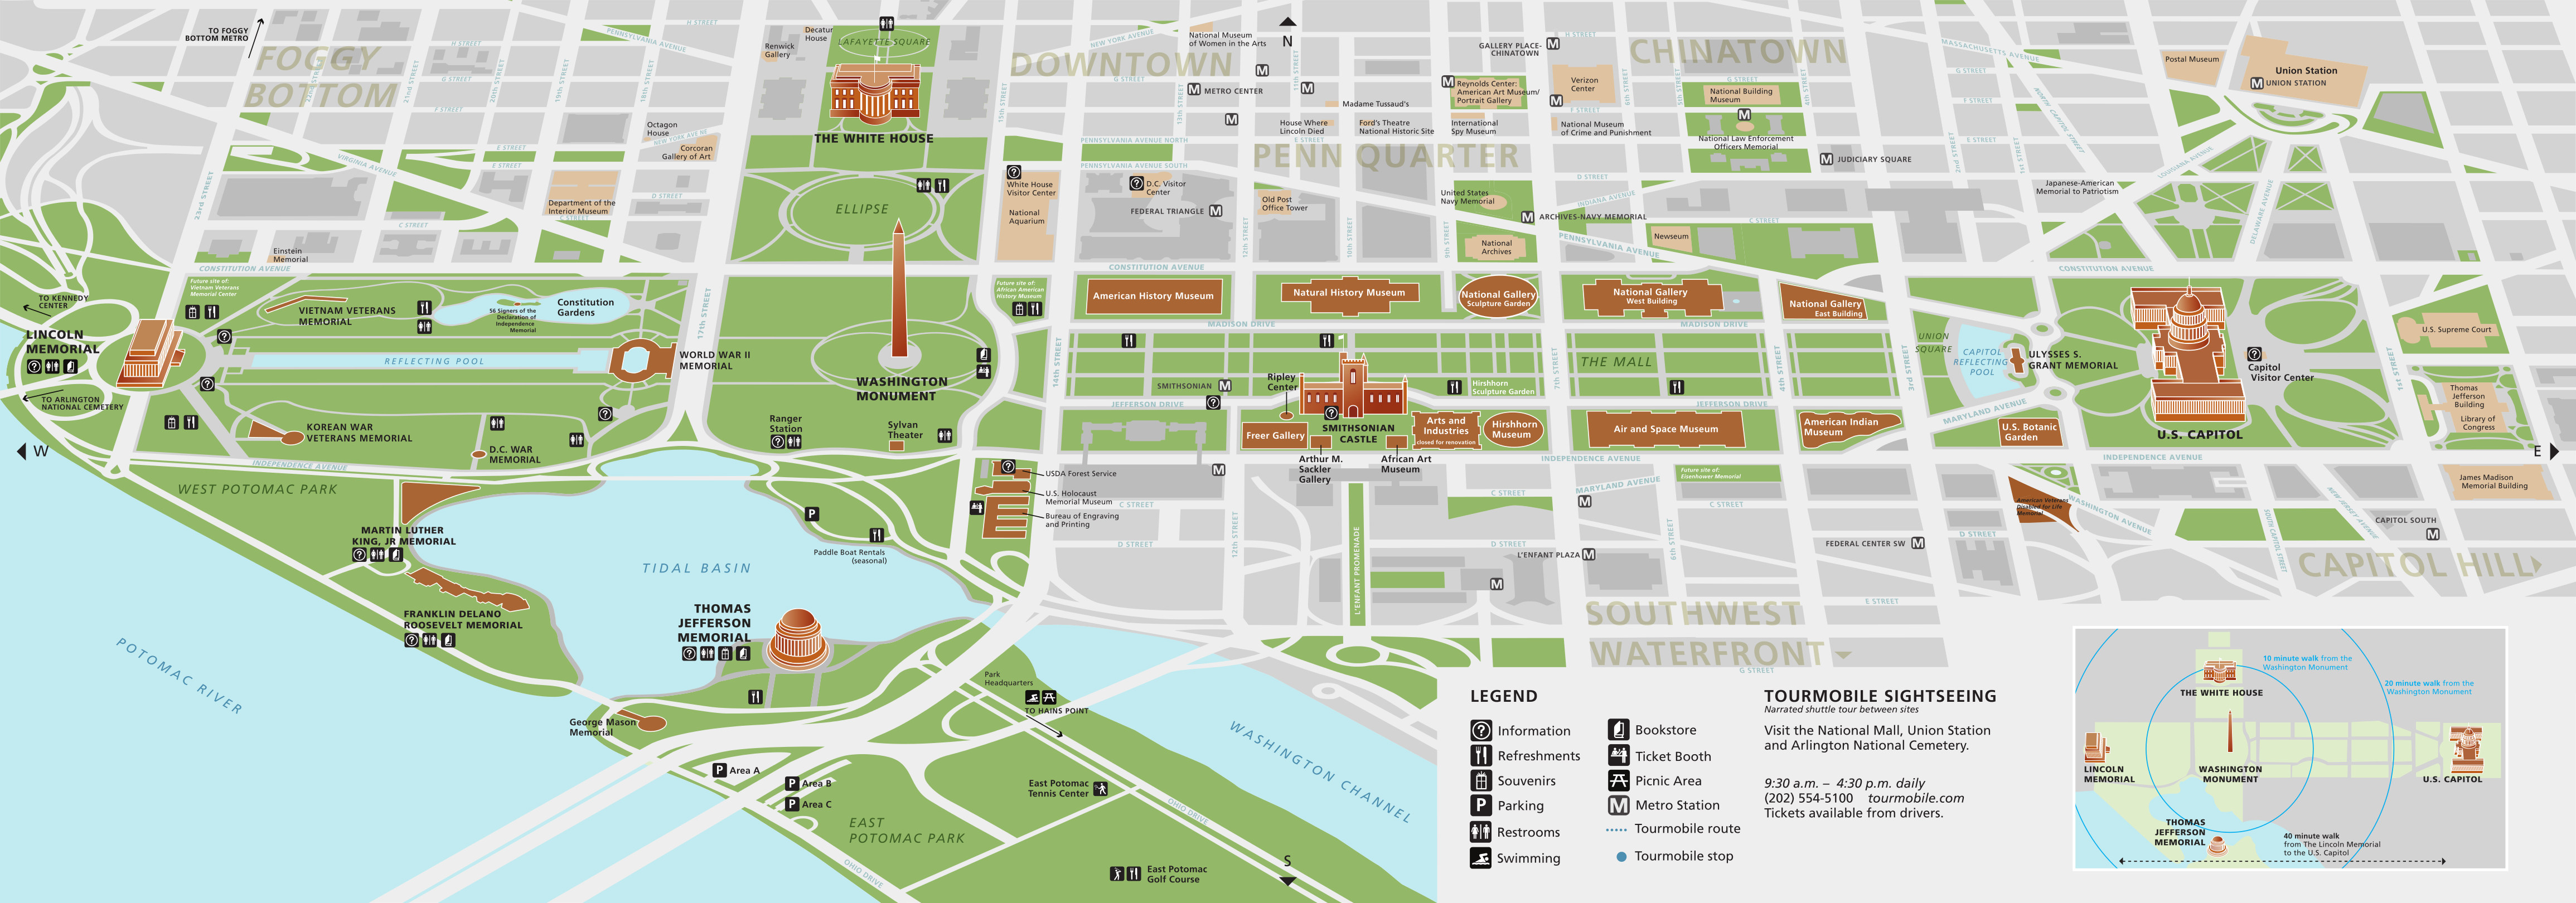 National Mall Maps | Npmaps - Just Free Maps, Period. - National Mall Map Printable